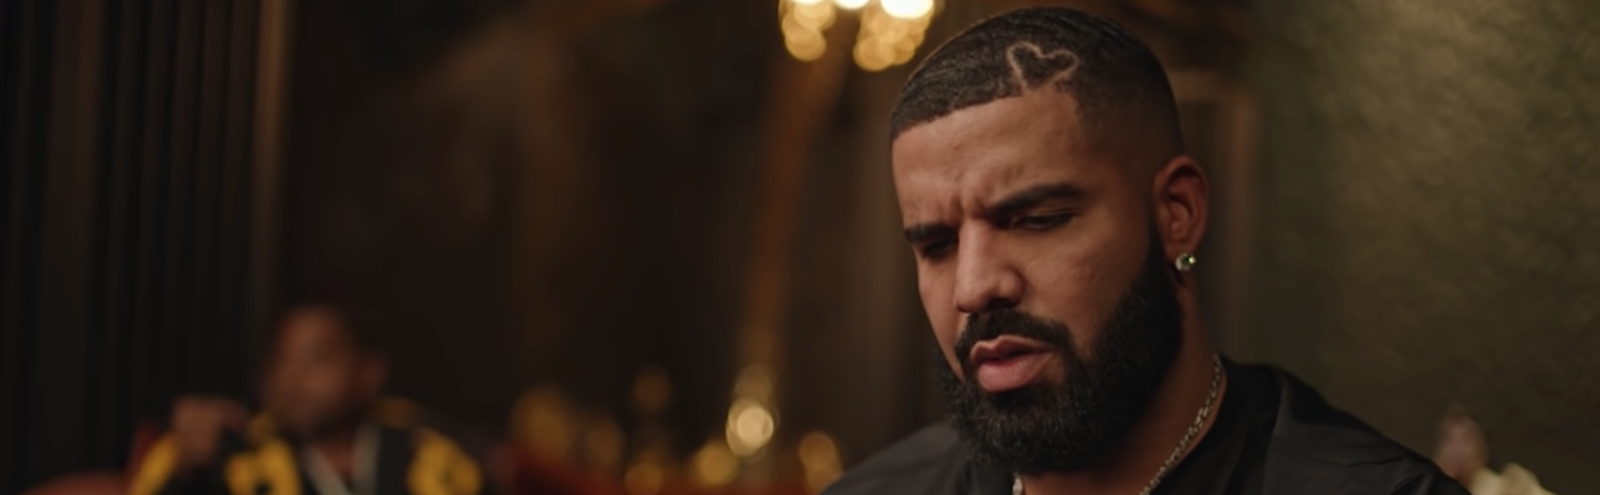 Drake Debuts New Haircut On Instagram, Fans Have A Lot To Say About It